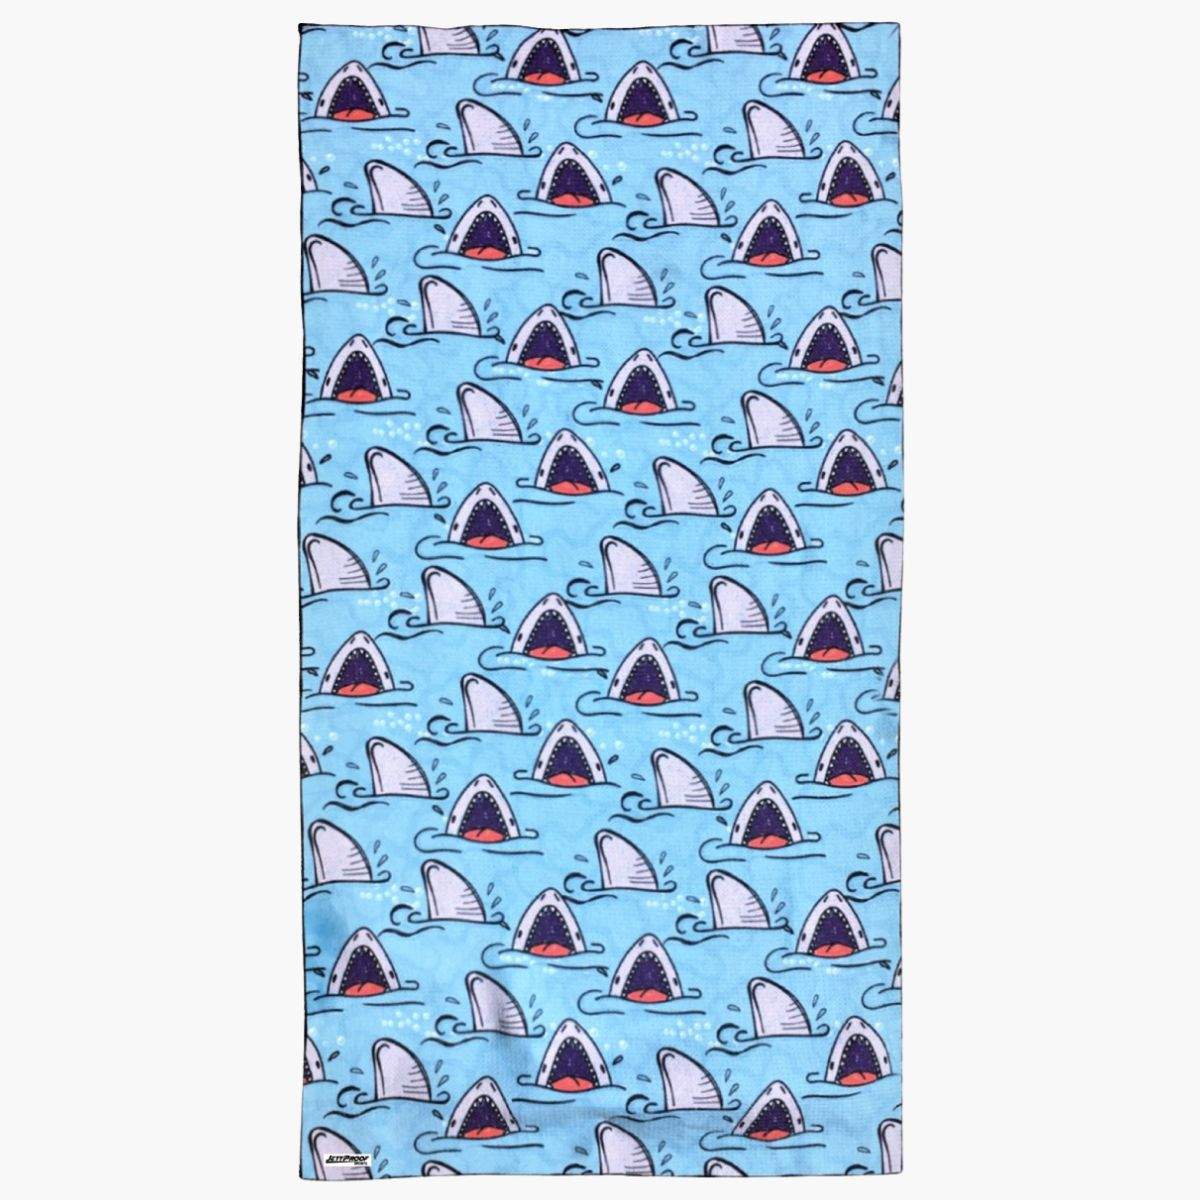 Sharks About - Kids Travel Towel